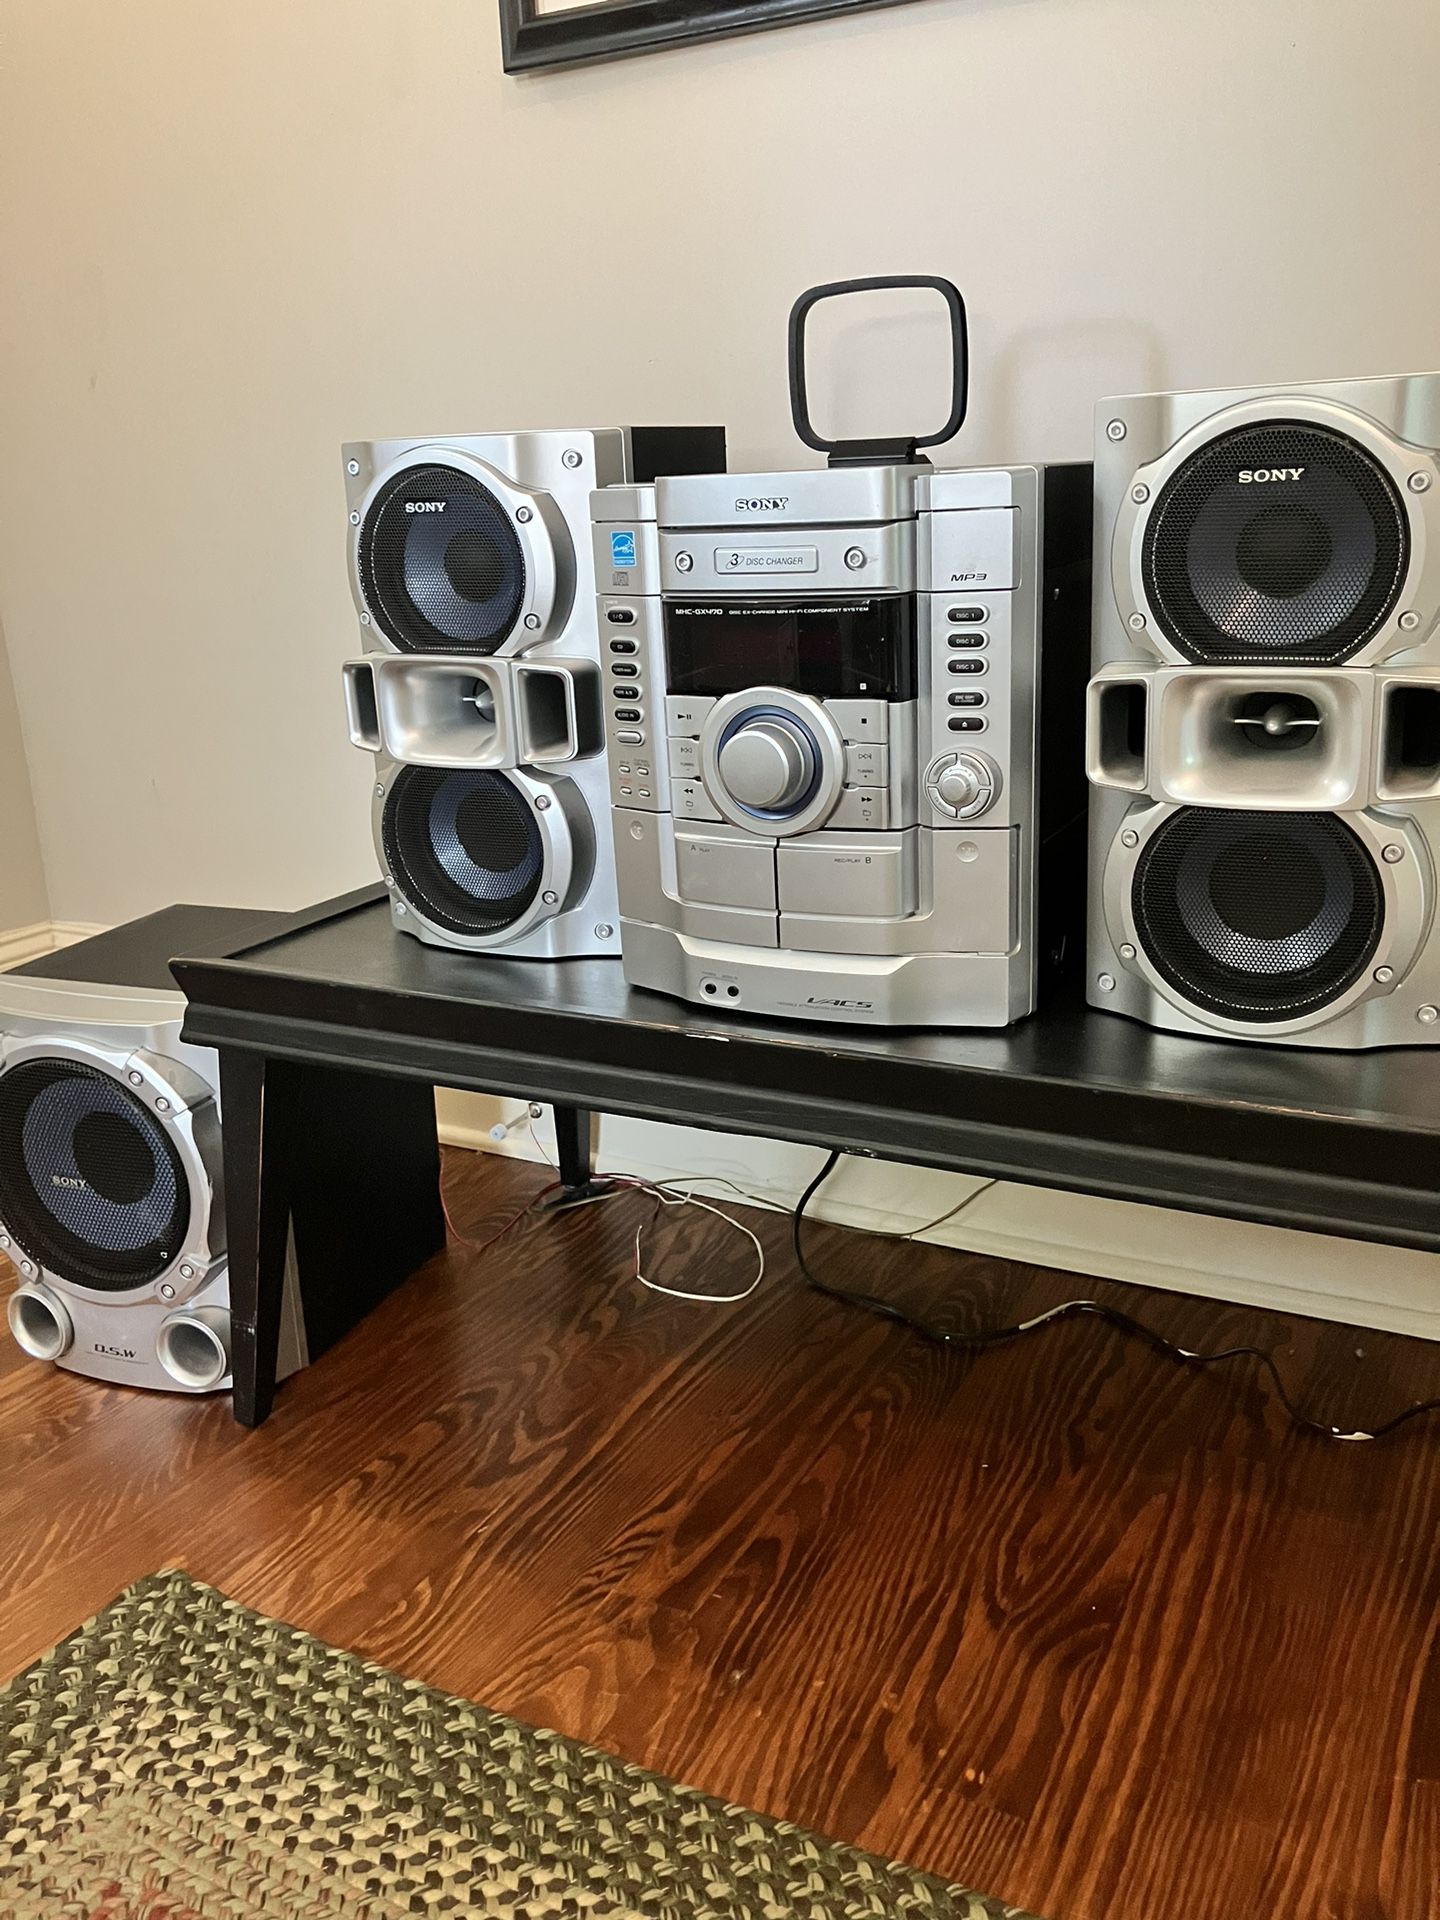 Sony Stereo HCD-GX470 CD/Tape Deck/Receiver With Bookshelf Speakers And Sub Woofer